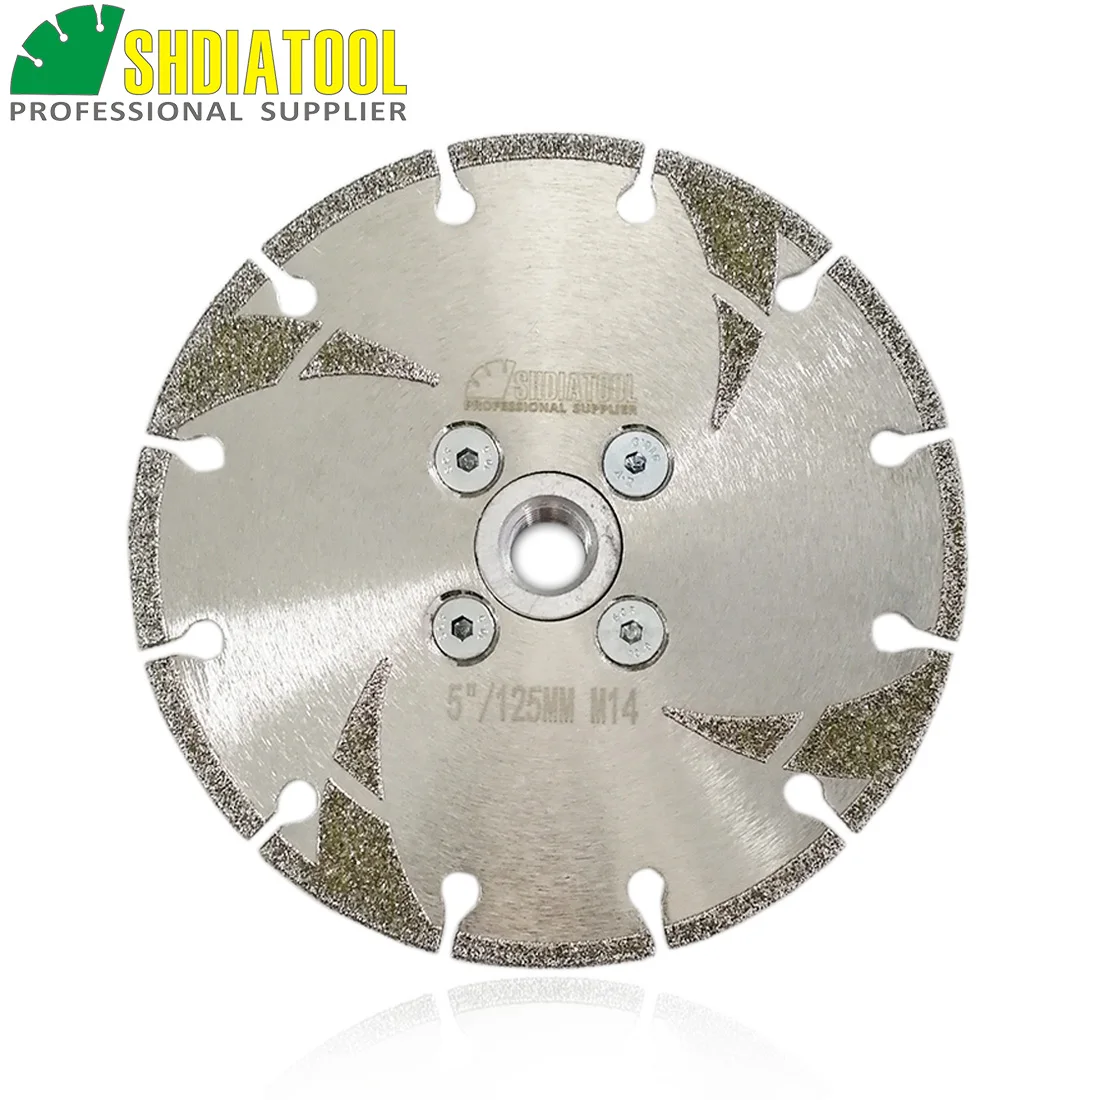 

SHDIATOOL 125MM electroplated Coated diamond blade 5" cutting & grinding disc M14 flange with protection for granite marble